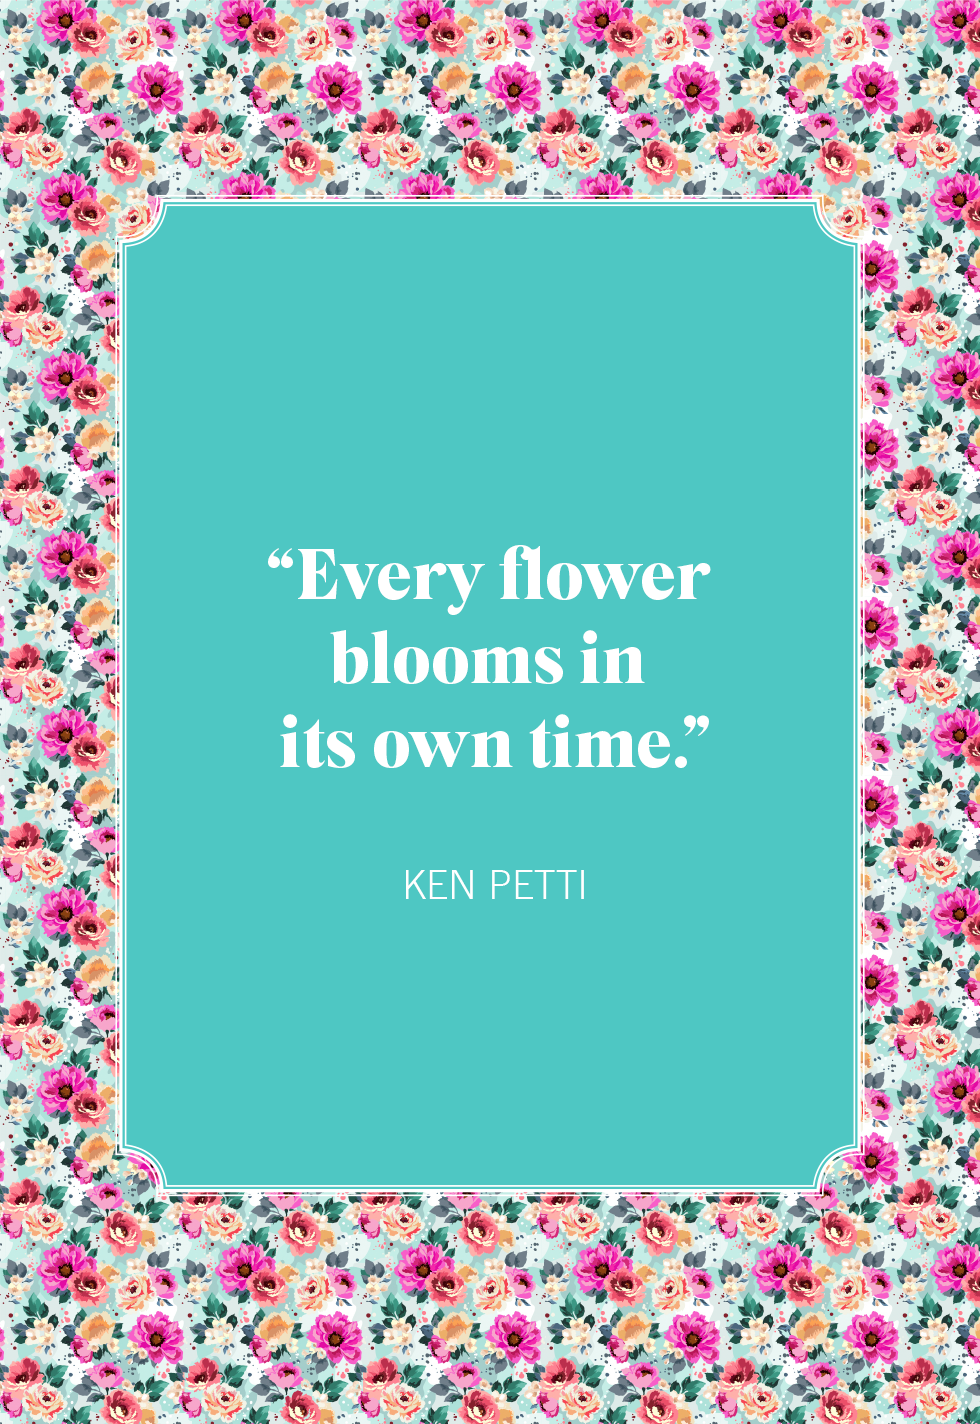 flowers quotes for facebook